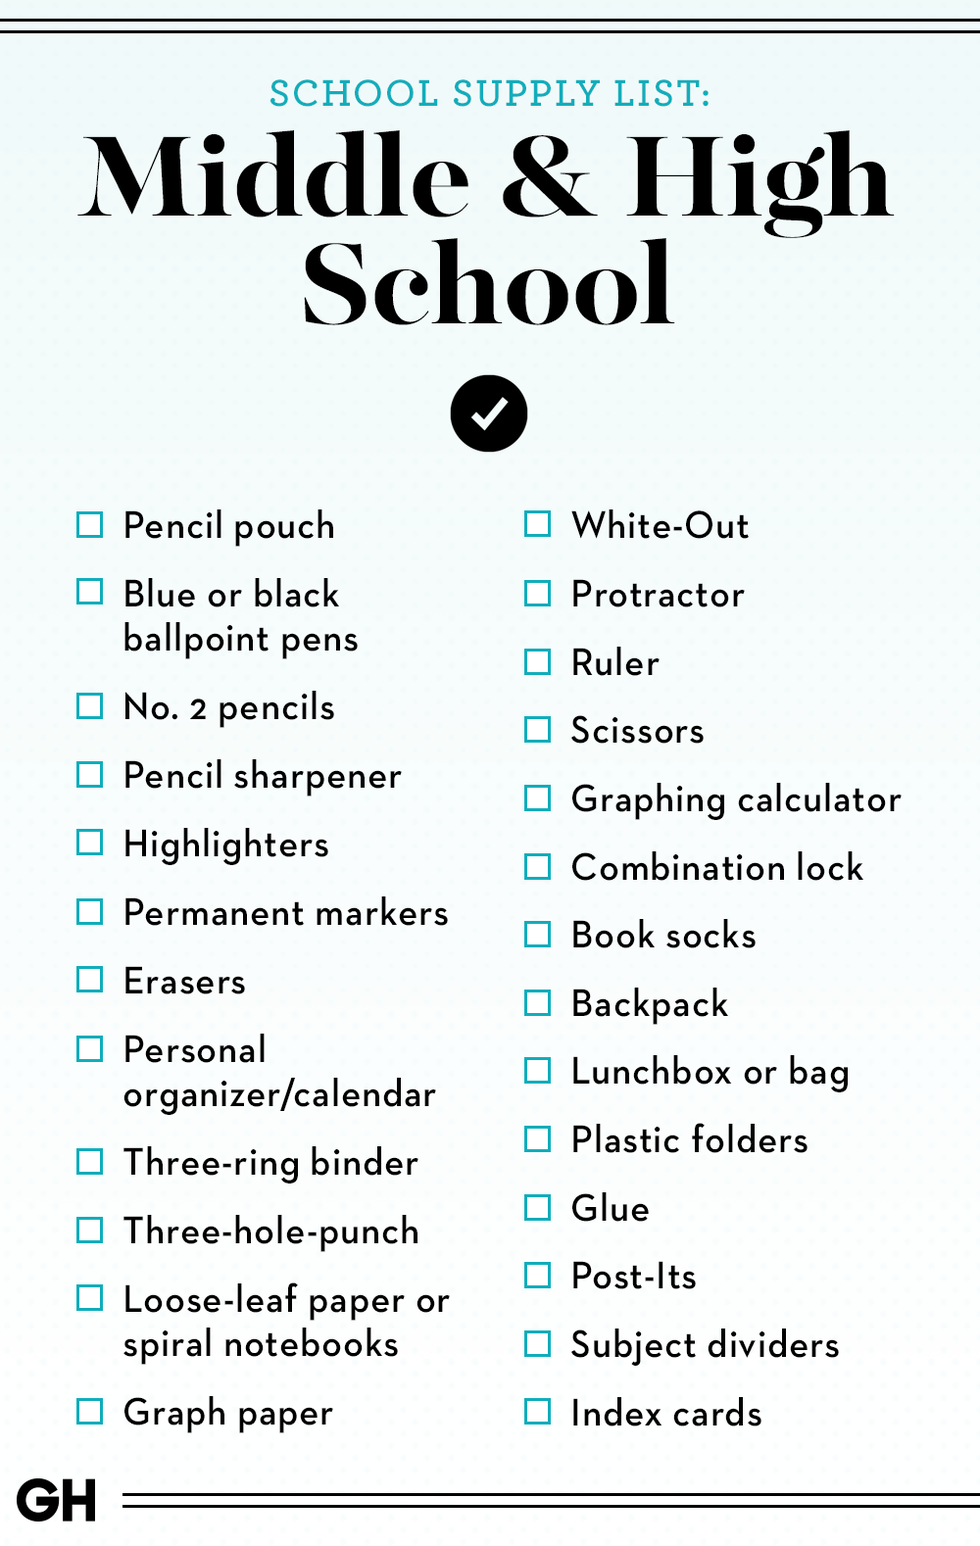 https://hips.hearstapps.com/hmg-prod/images/back-to-school-checklists-middle-and-high-school-1558037185.png?crop=1xw:1xh;center,top&resize=980:*